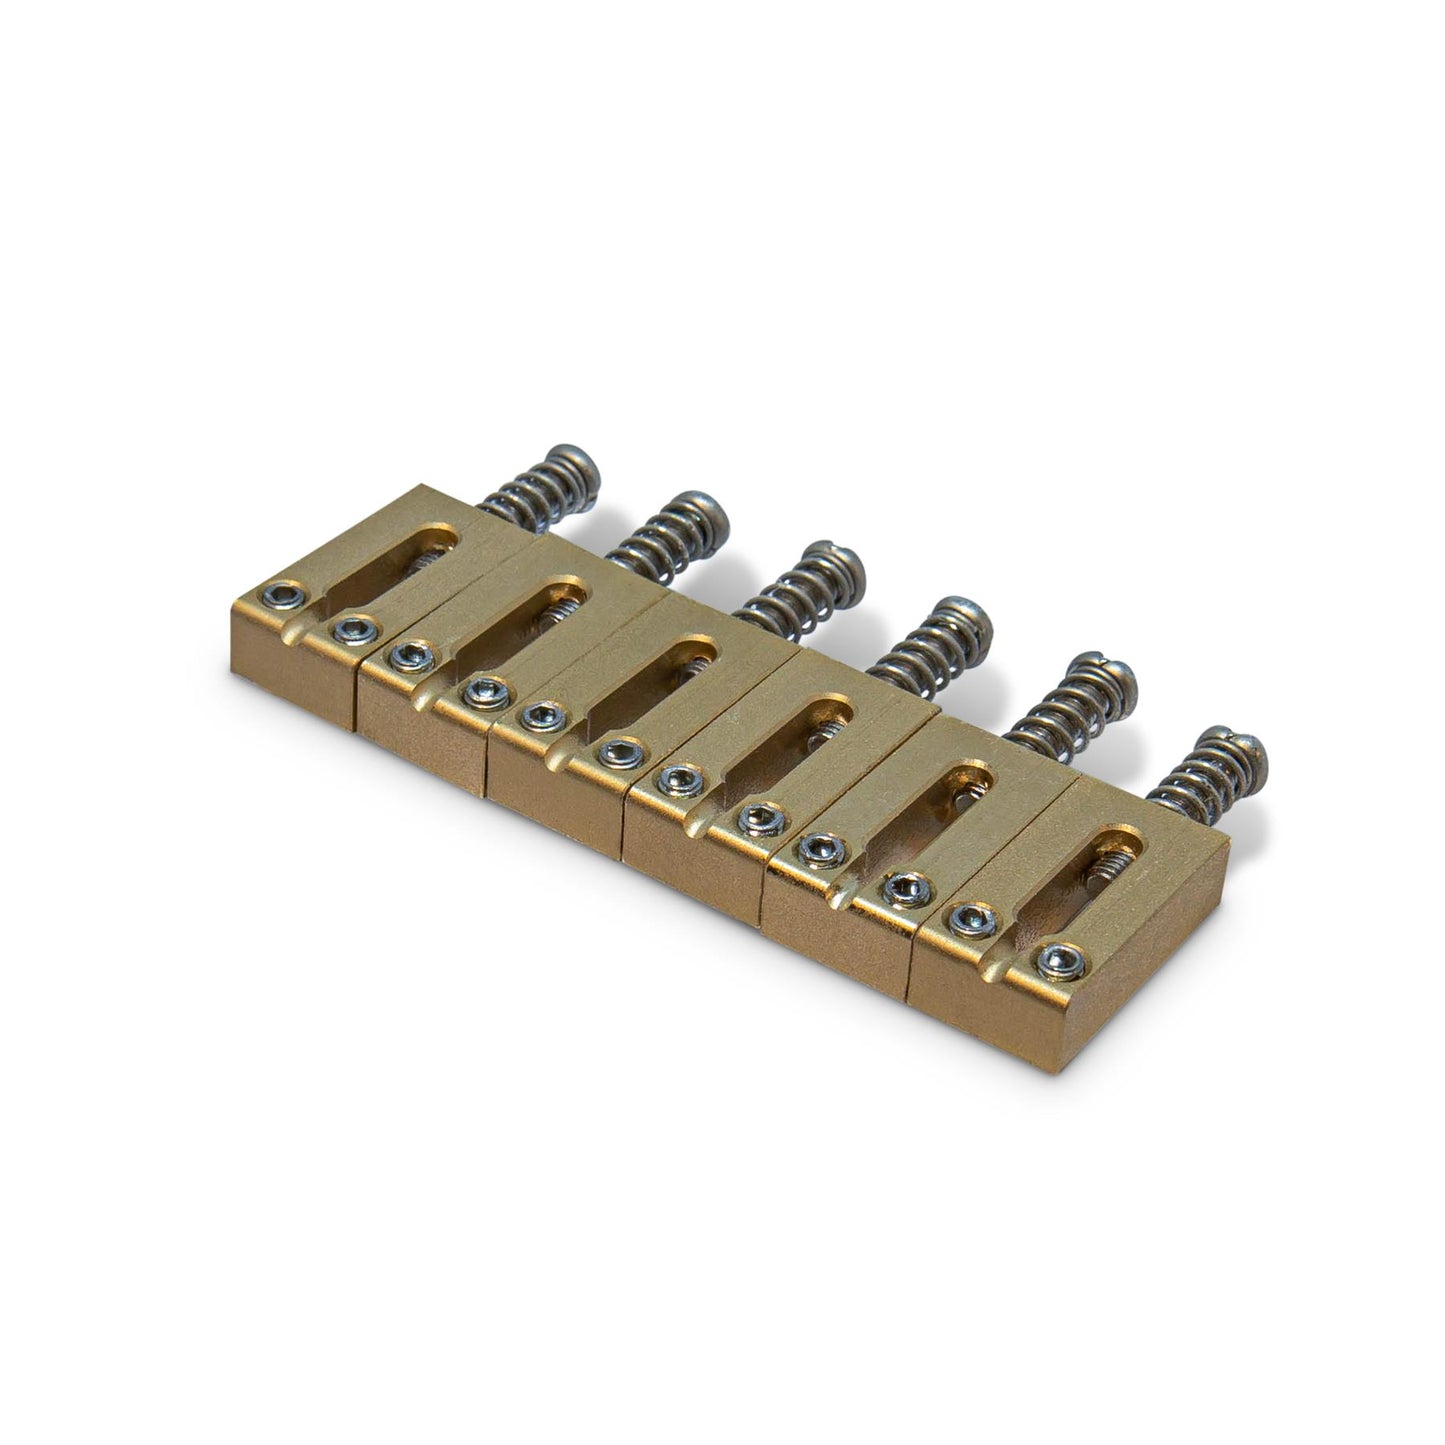 6 x 10.5mm Solid Brass Bridge Tremolo Saddles for Stratocaster Electric Guitar